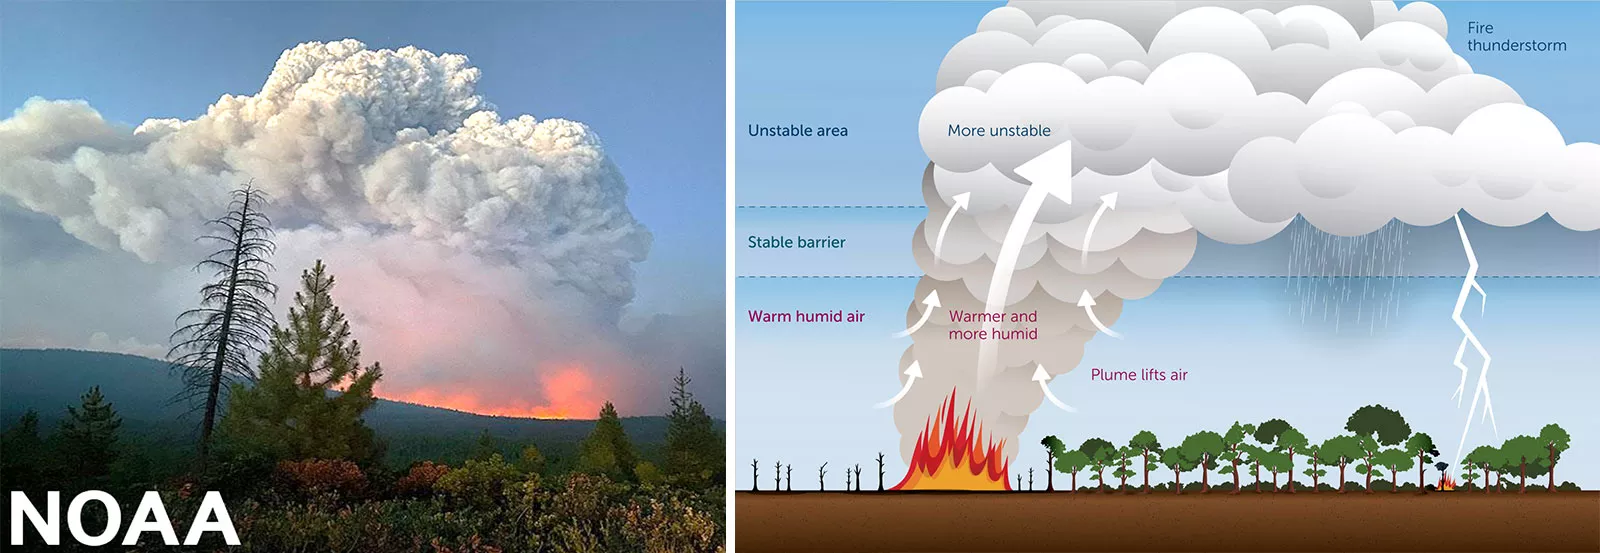 2 images: A large pyrocumulonimbus cloud against a blue sky. An illustration of the development of a pyrocumulonimbus cloud uses arrows to depict warm humid air being pulled upward by a smoke plume that rises above a wildfire. As the warm air is lifted upward, it reaches the stable barrier in the atmosphere, above which it becomes more unstable and forms a pyrocumulonimbus cloud. The pyroCb, or fire thunderstorm, results in rain, lightning, and a large smoke plume stretching downwind of the wildfire. 